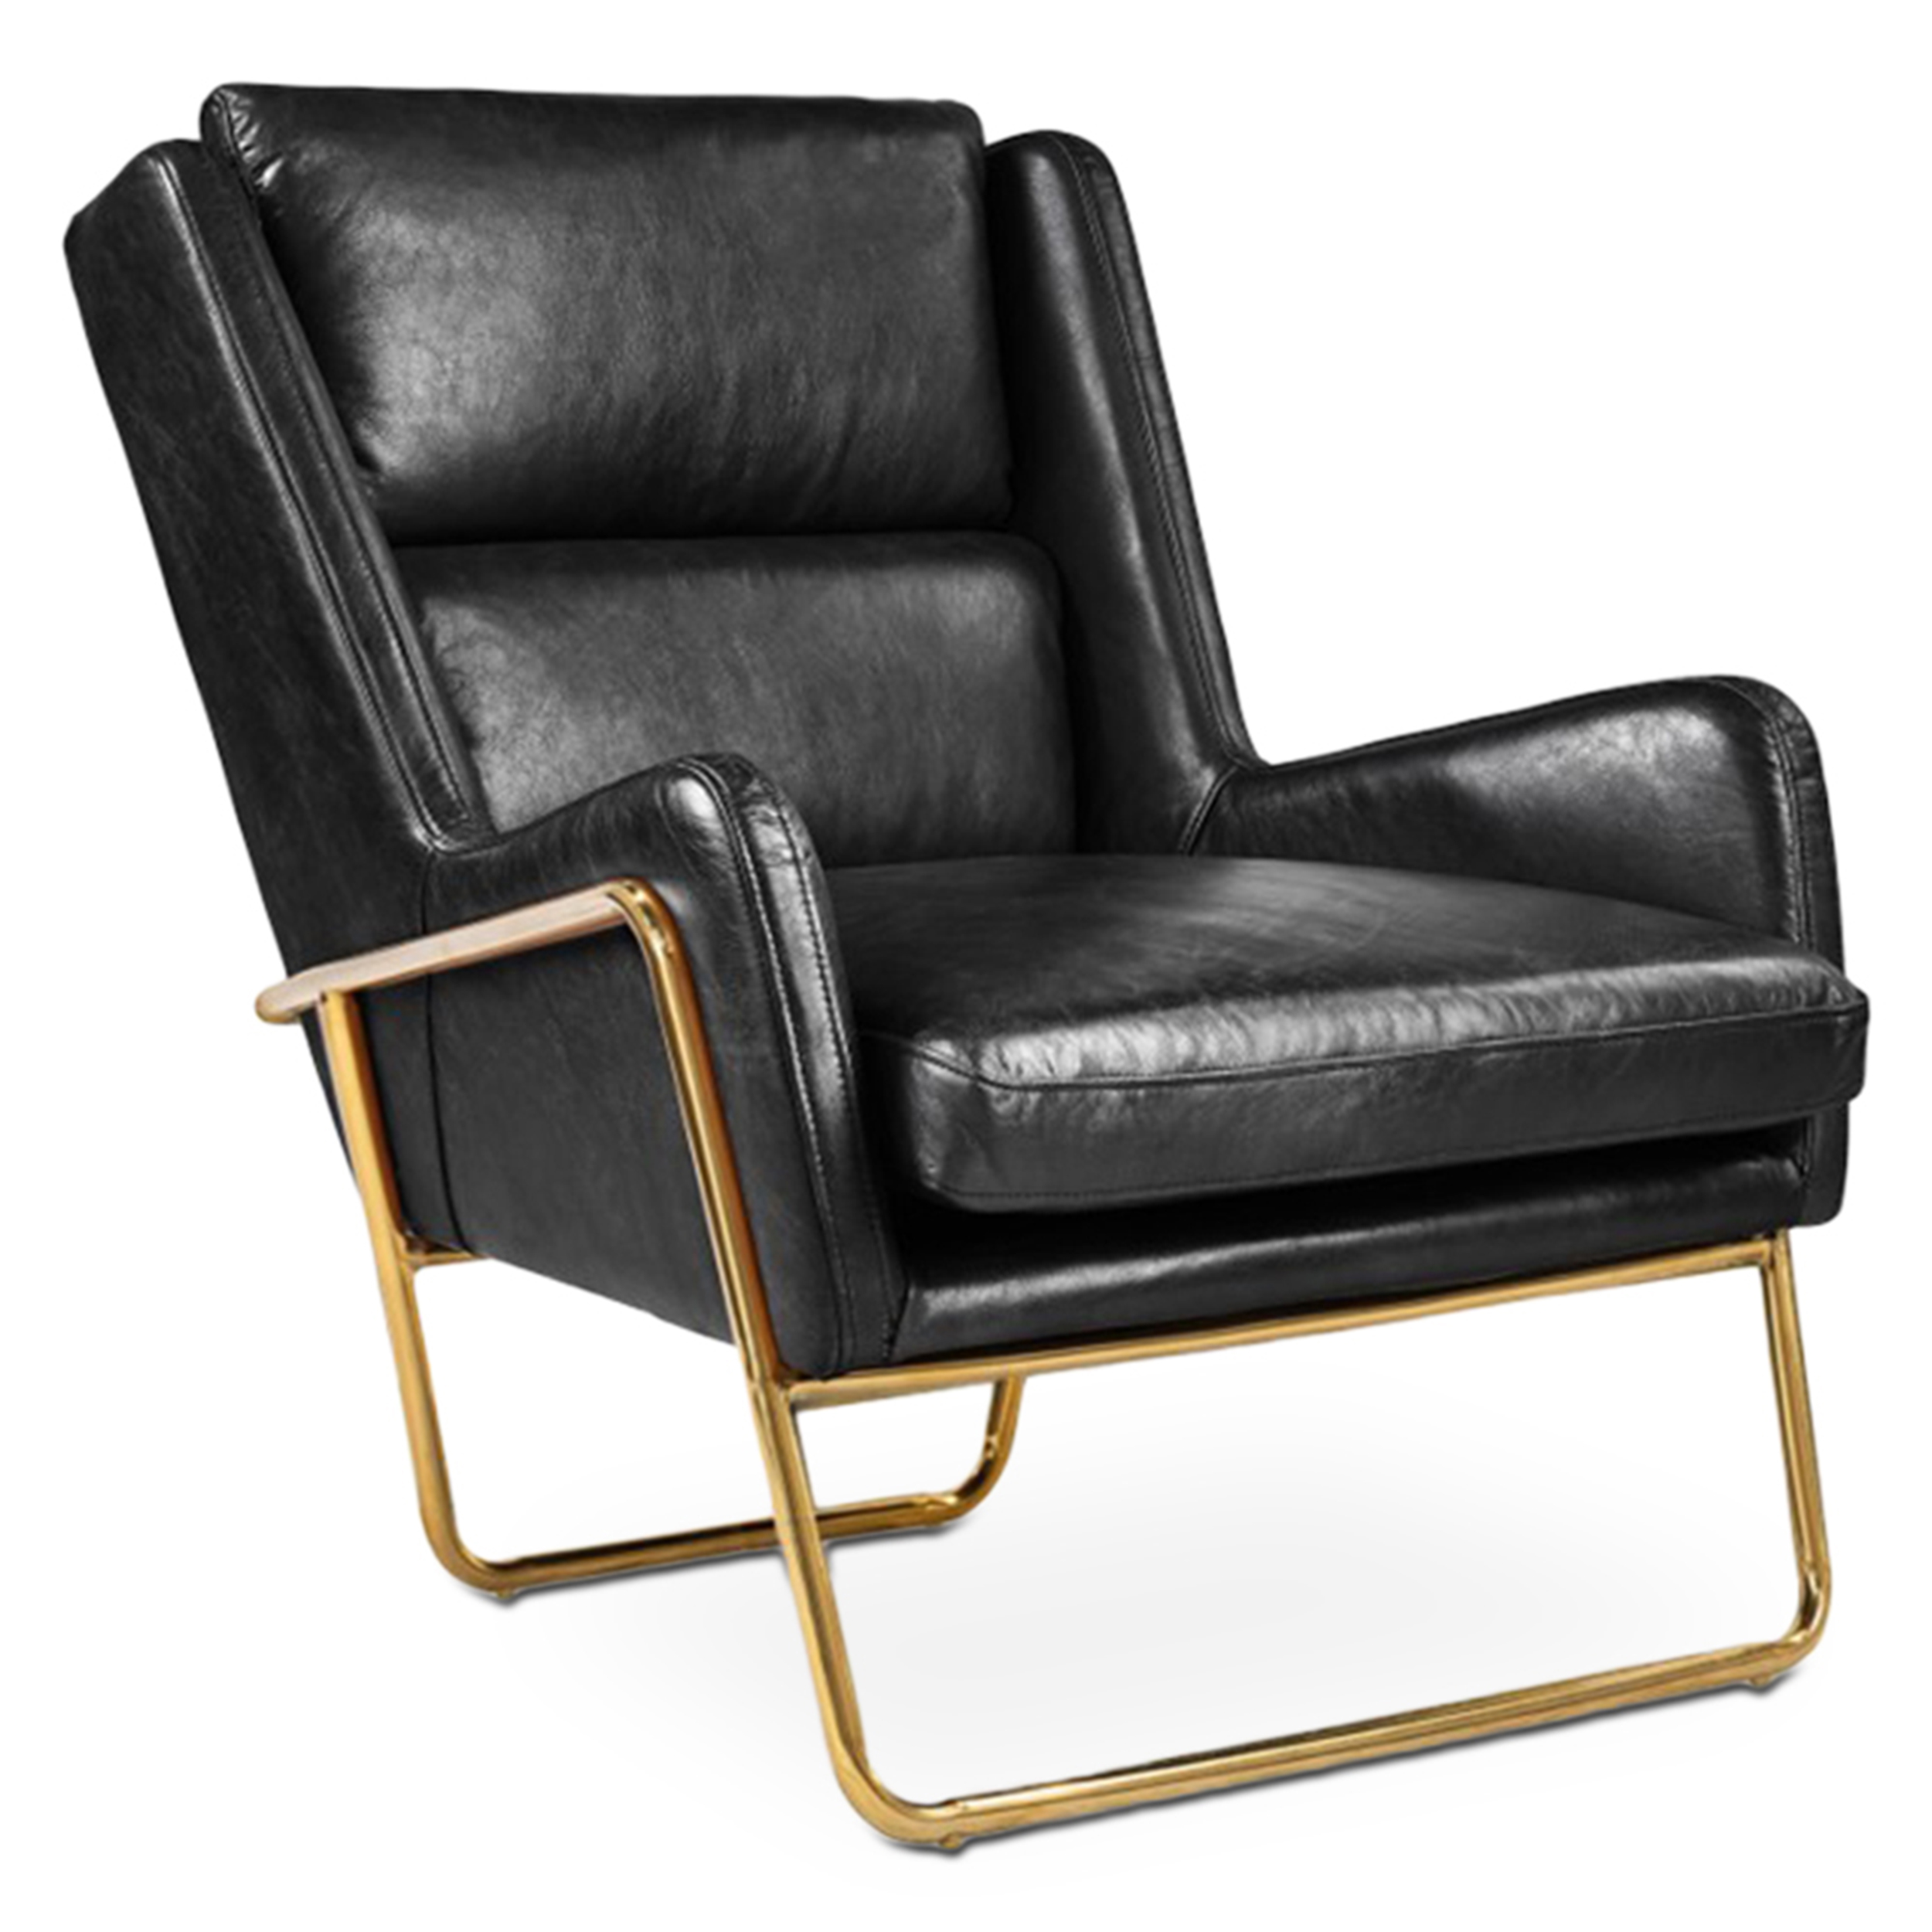 WS - London armchair - Black & Brass (Front angle)